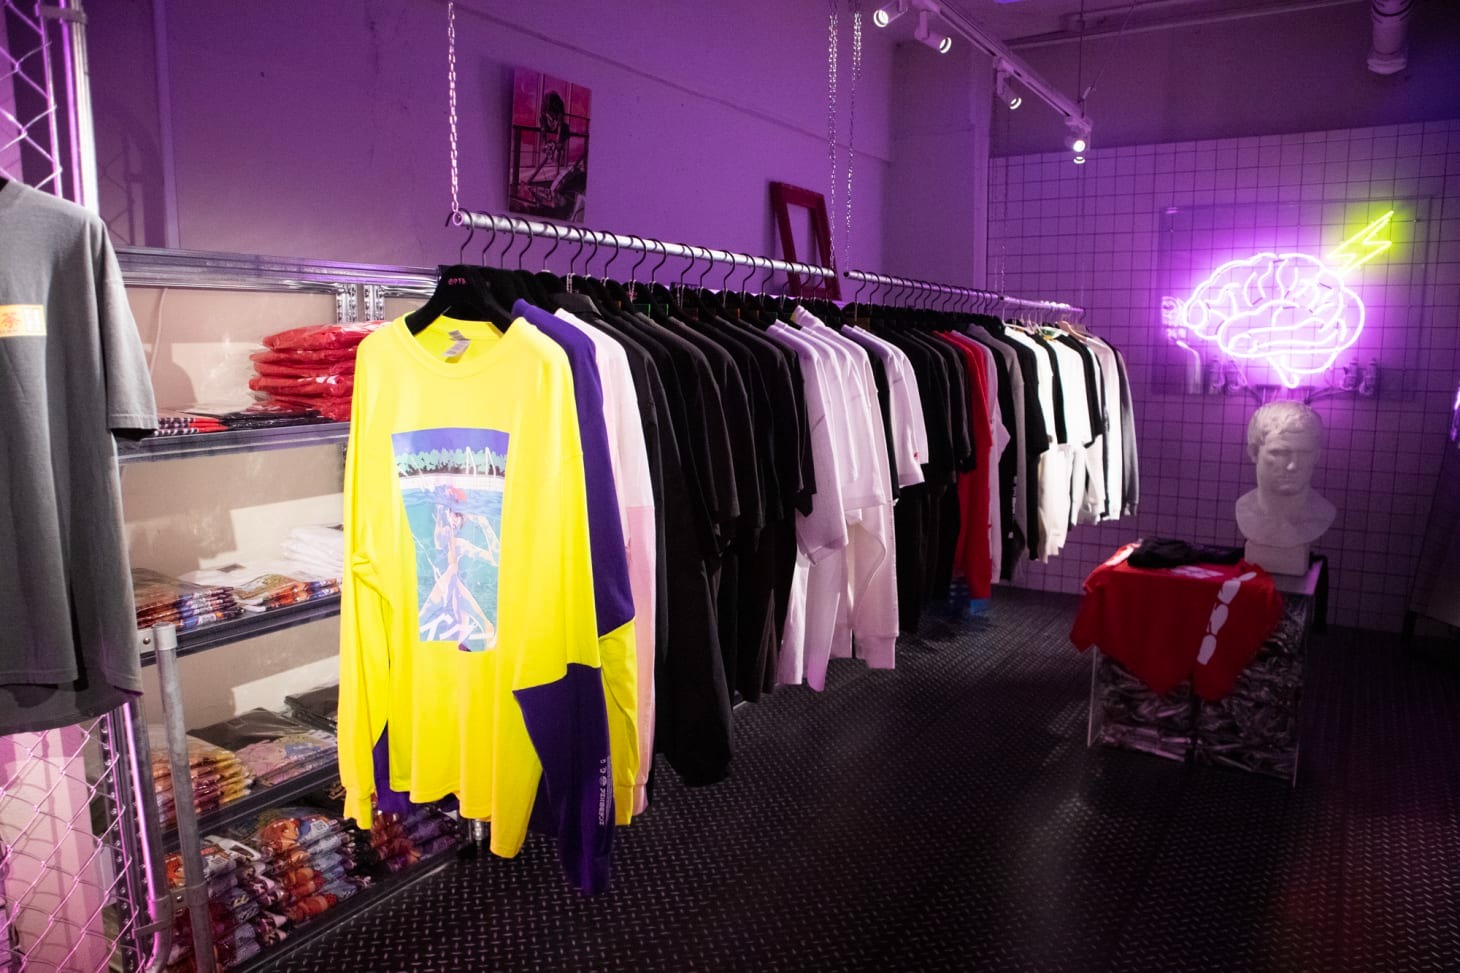 Tokyo Fashion Akiba Kanden Denki An Akihabara Store Known For Japanese Anime Game Inspired Goods Opened A New Shop In Laforet Harajuku The Brand Concept Was Inspired By The World S Misunderstood